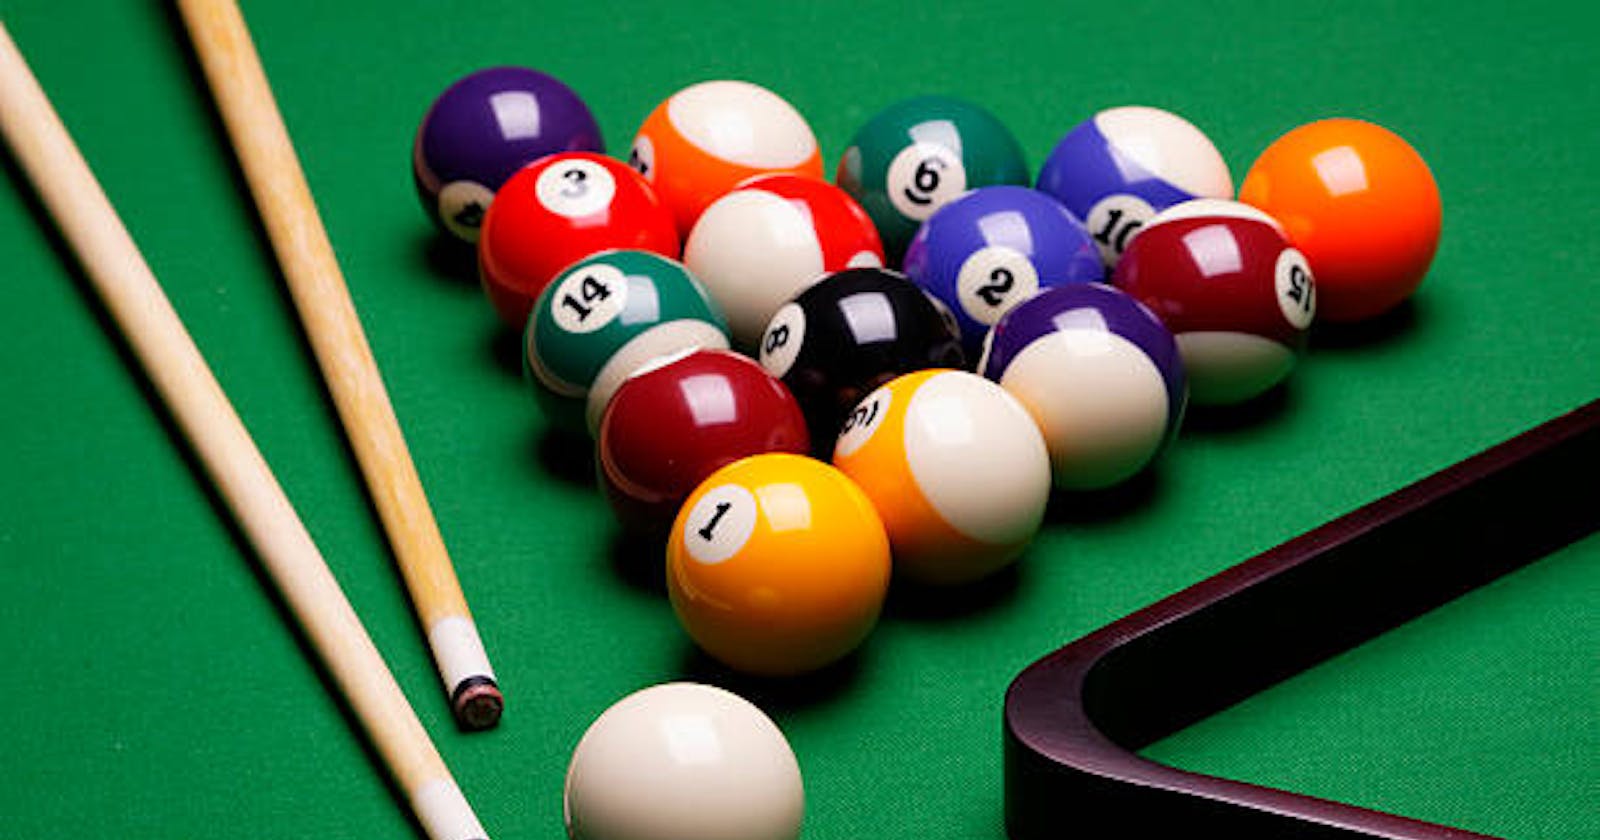 Pool Tables Market 2027: Overview, Analysis, Growth, Outlook and Industry Report